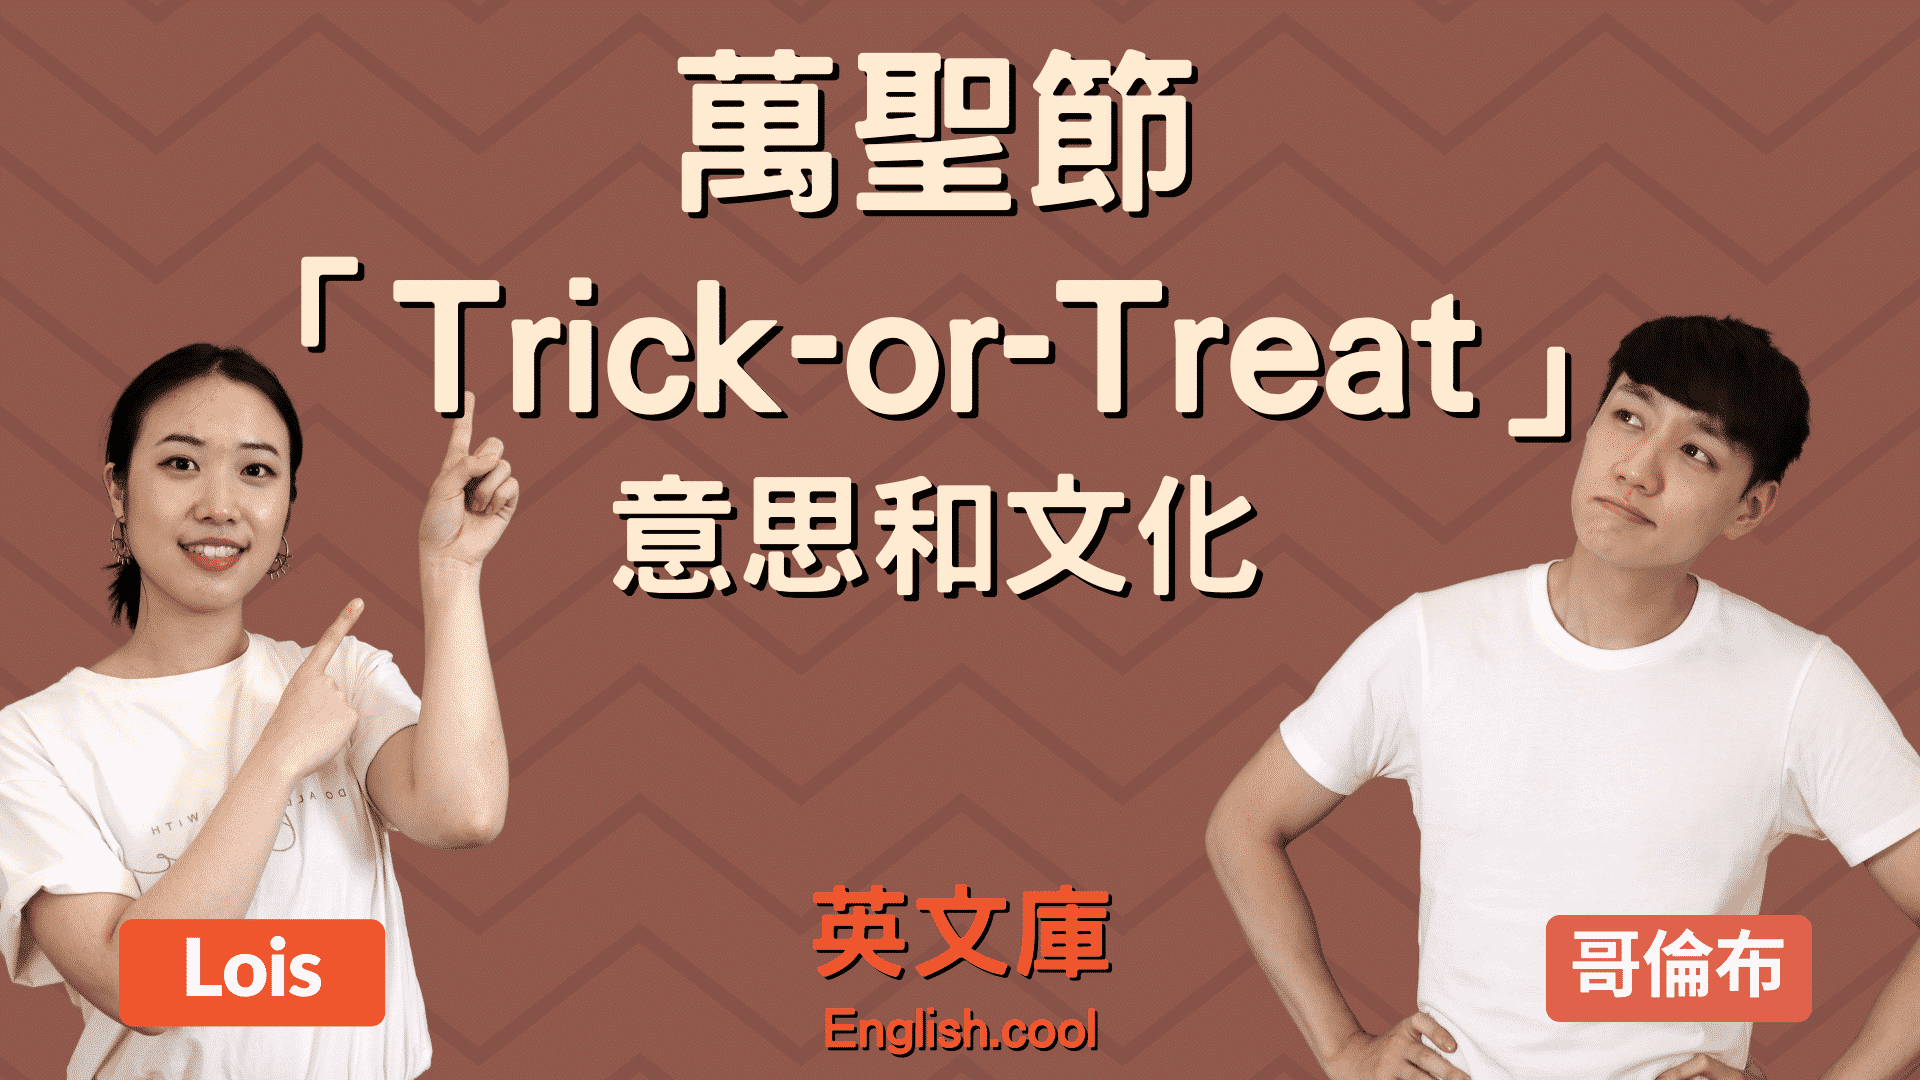 You are currently viewing 【萬聖節英文】關於 Trick-or-Treat 意思、文化！